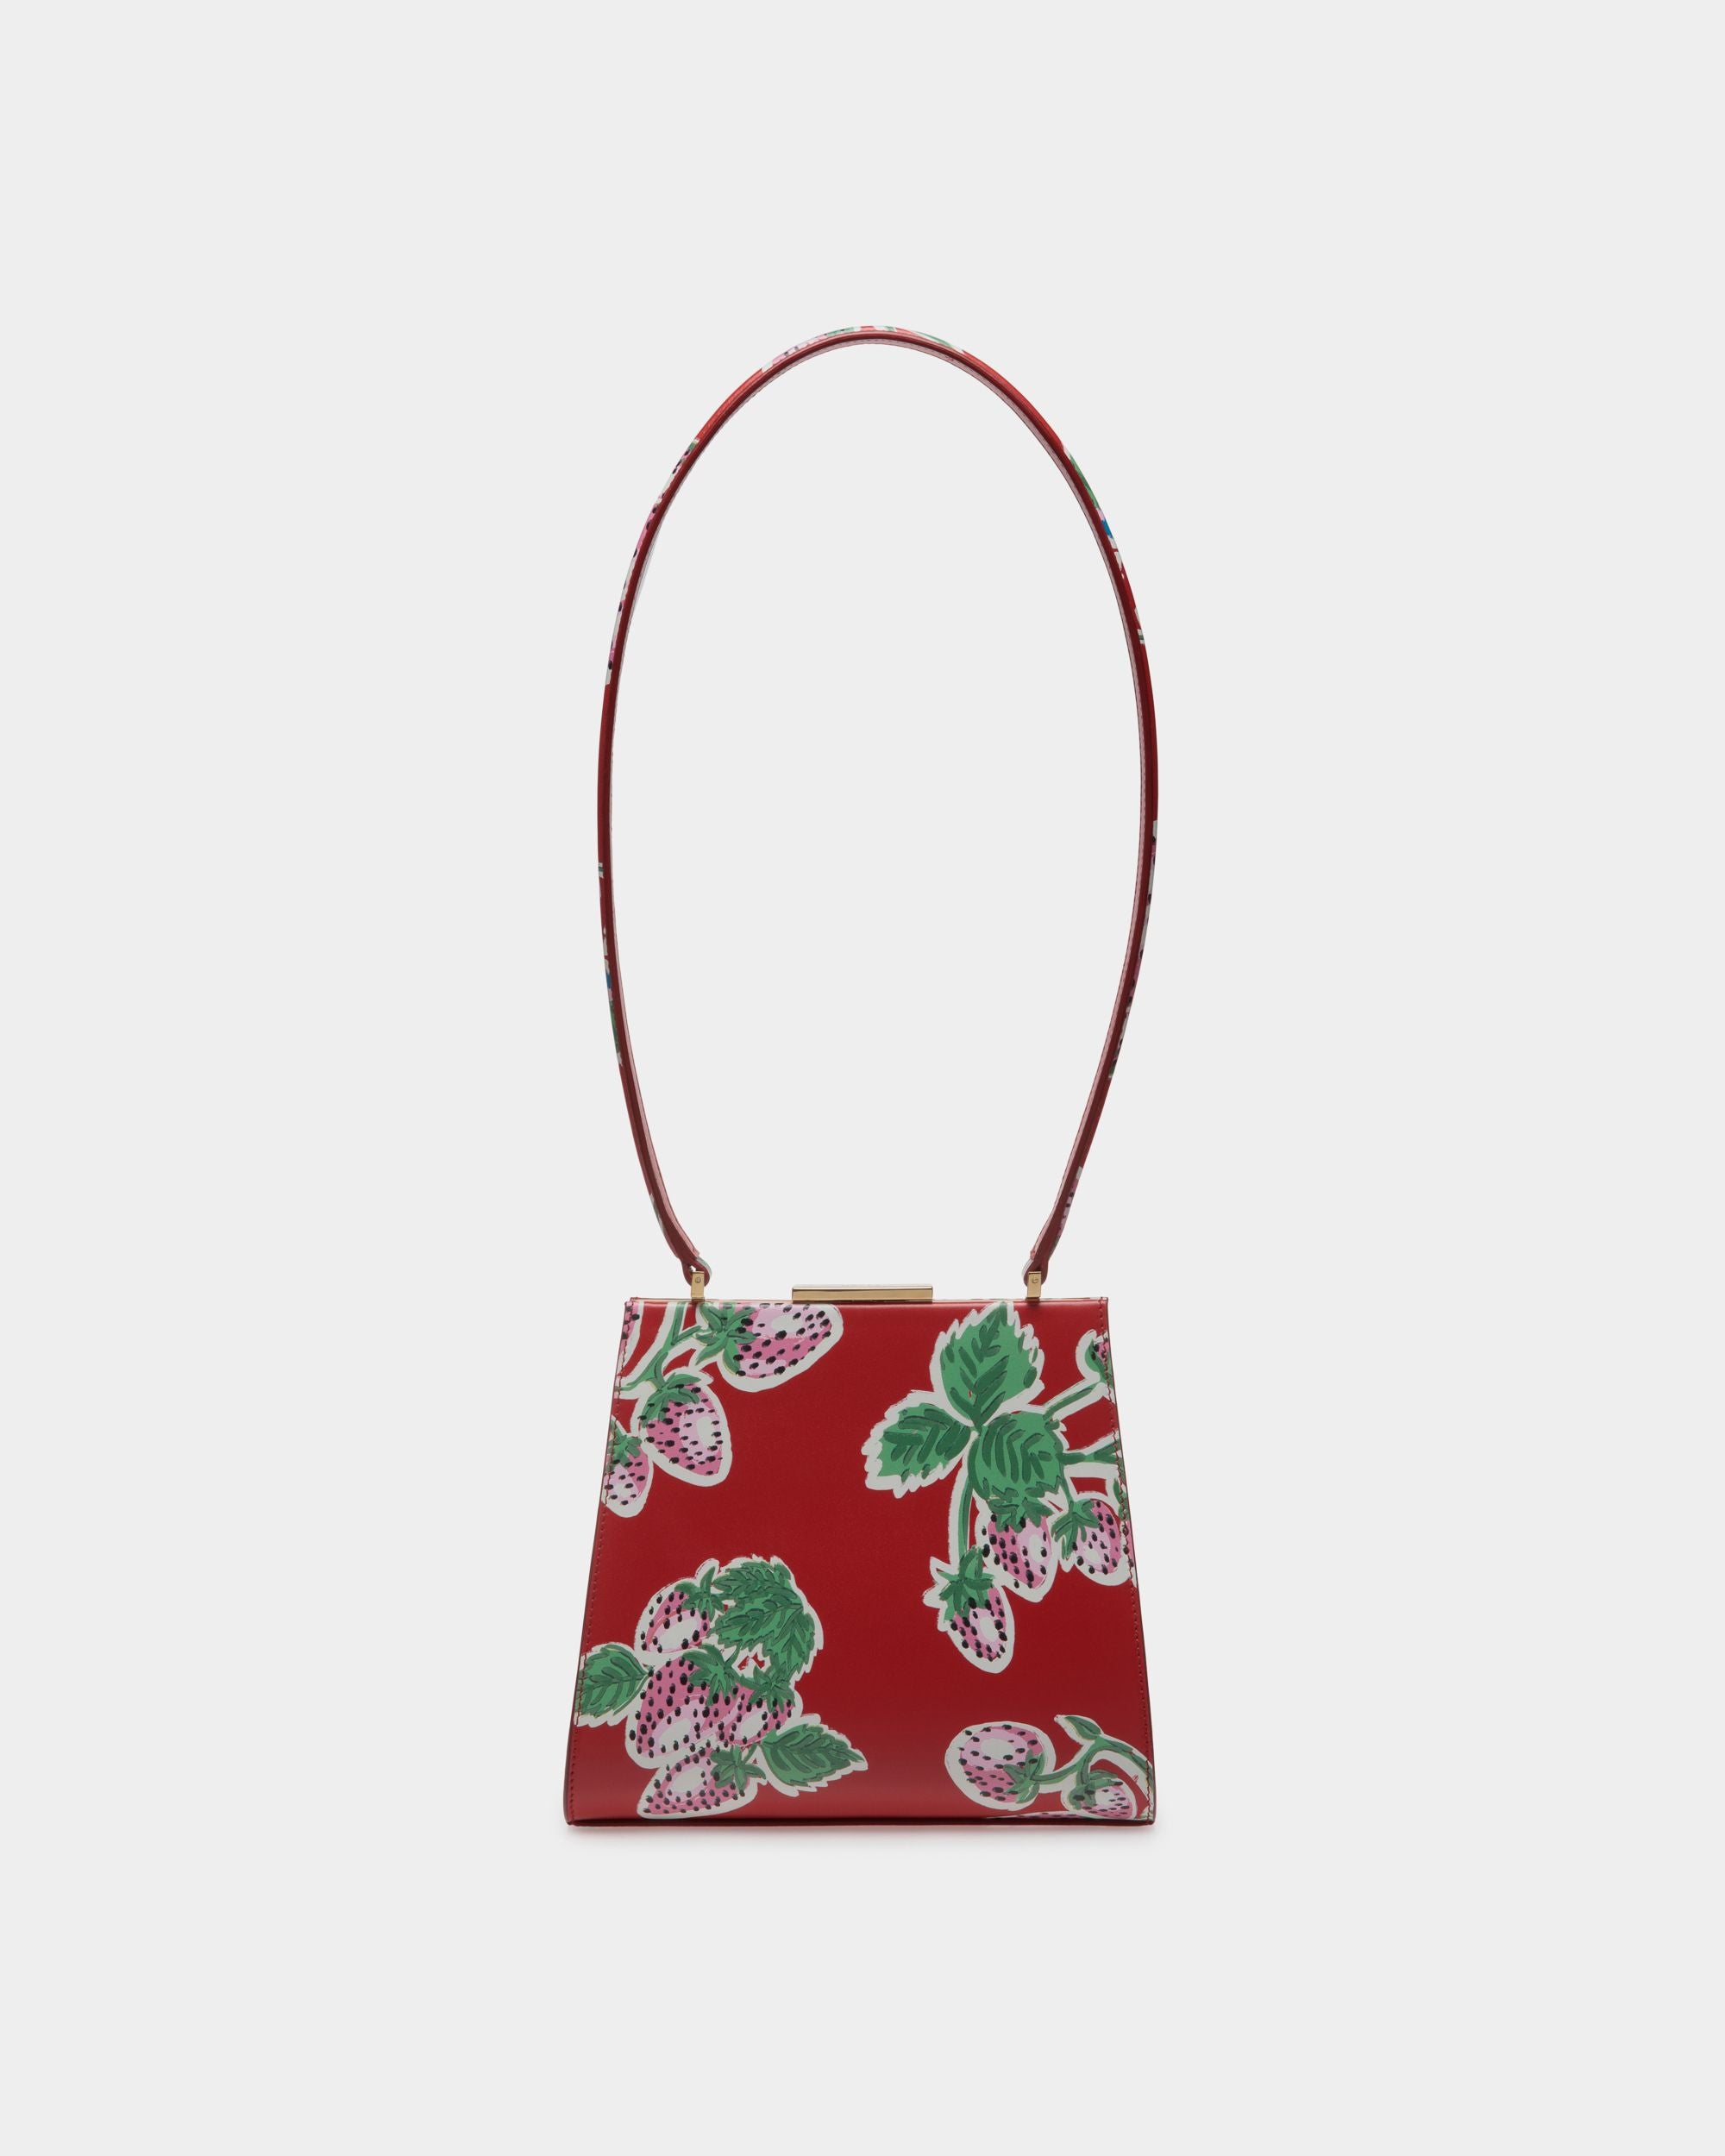 Women's Deco Shoulder Bag in Strawberry Print Leather | Bally | Still Life Front